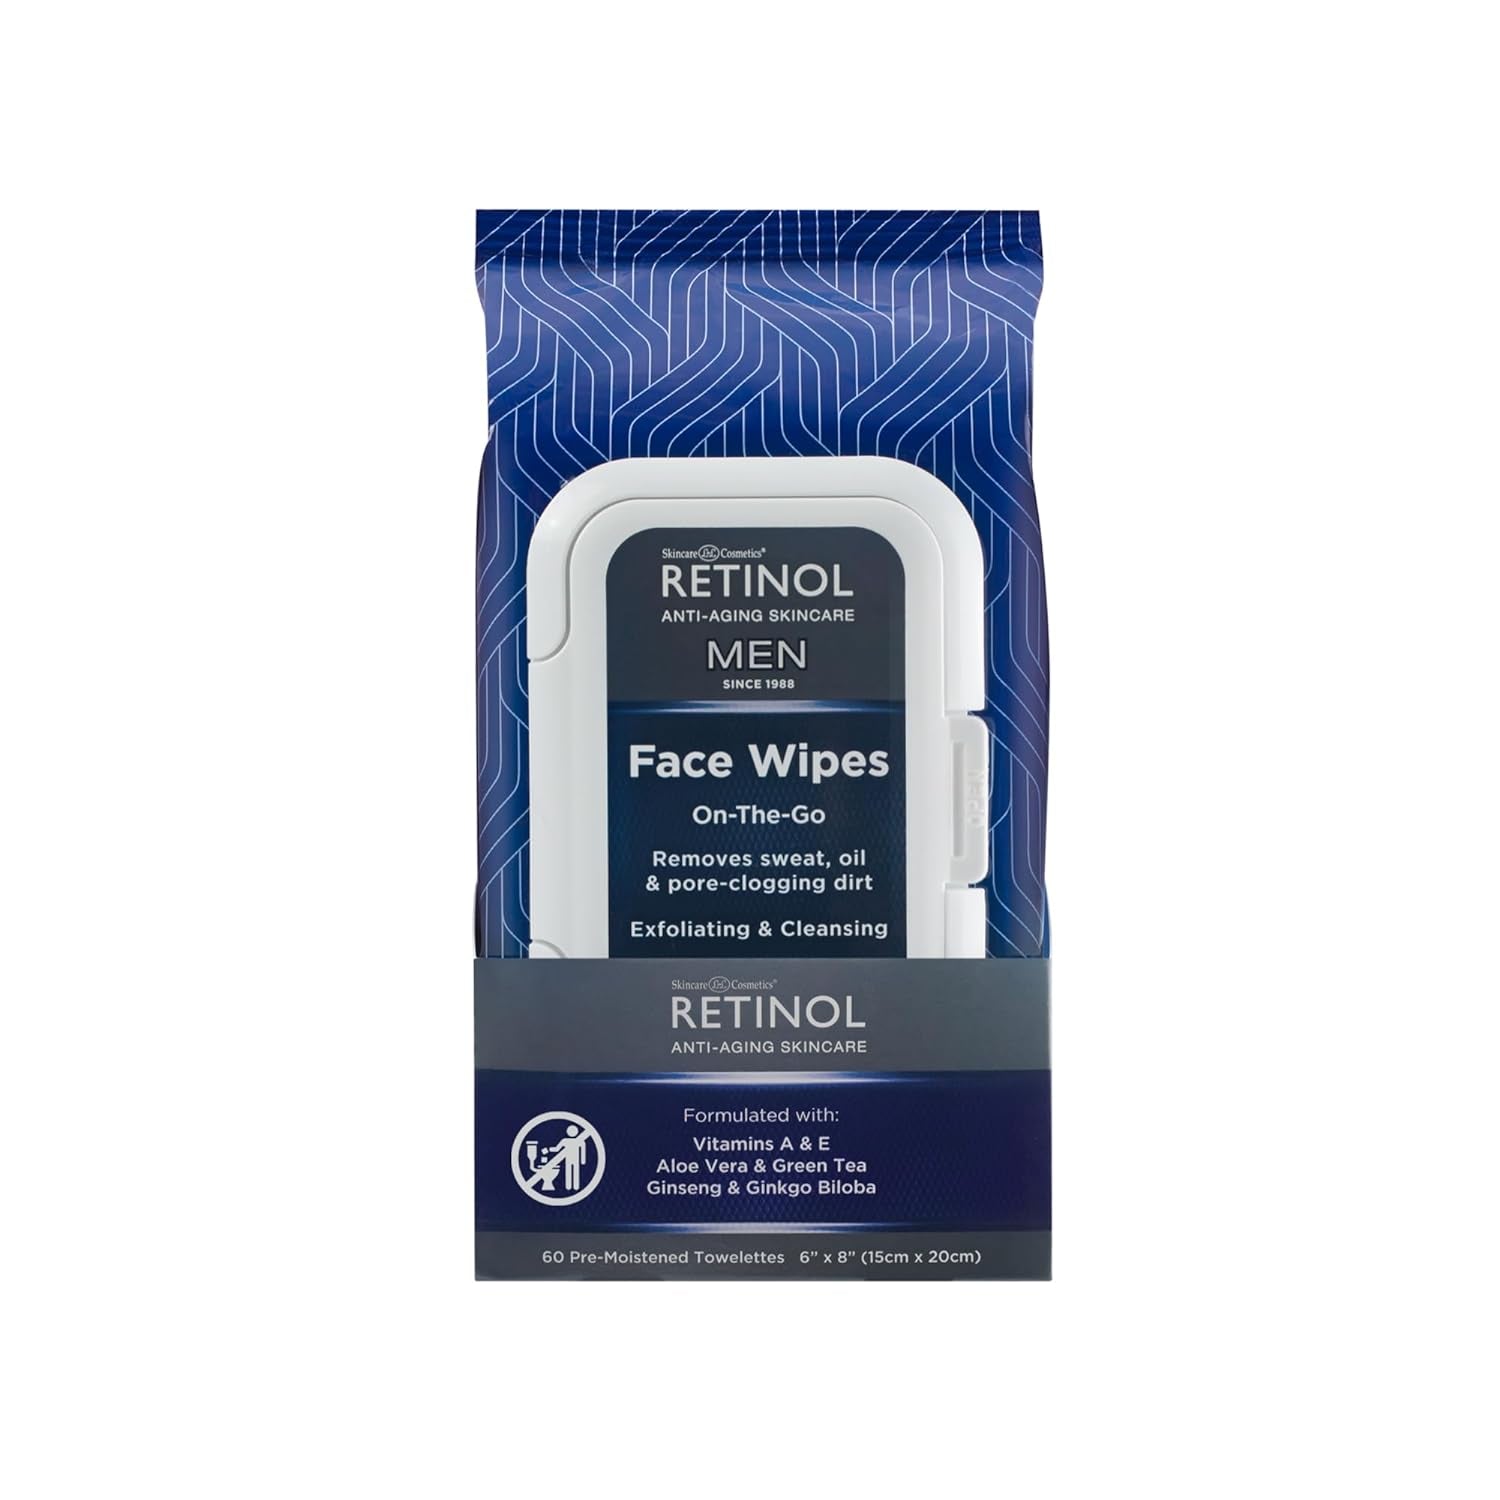 Men Facial Wipes Anti-Aging Cleansing Towelettes - Quickly Cleanse Face from Sweat, Oil and Pore-Clogging Dirt without Any Heavy Residue